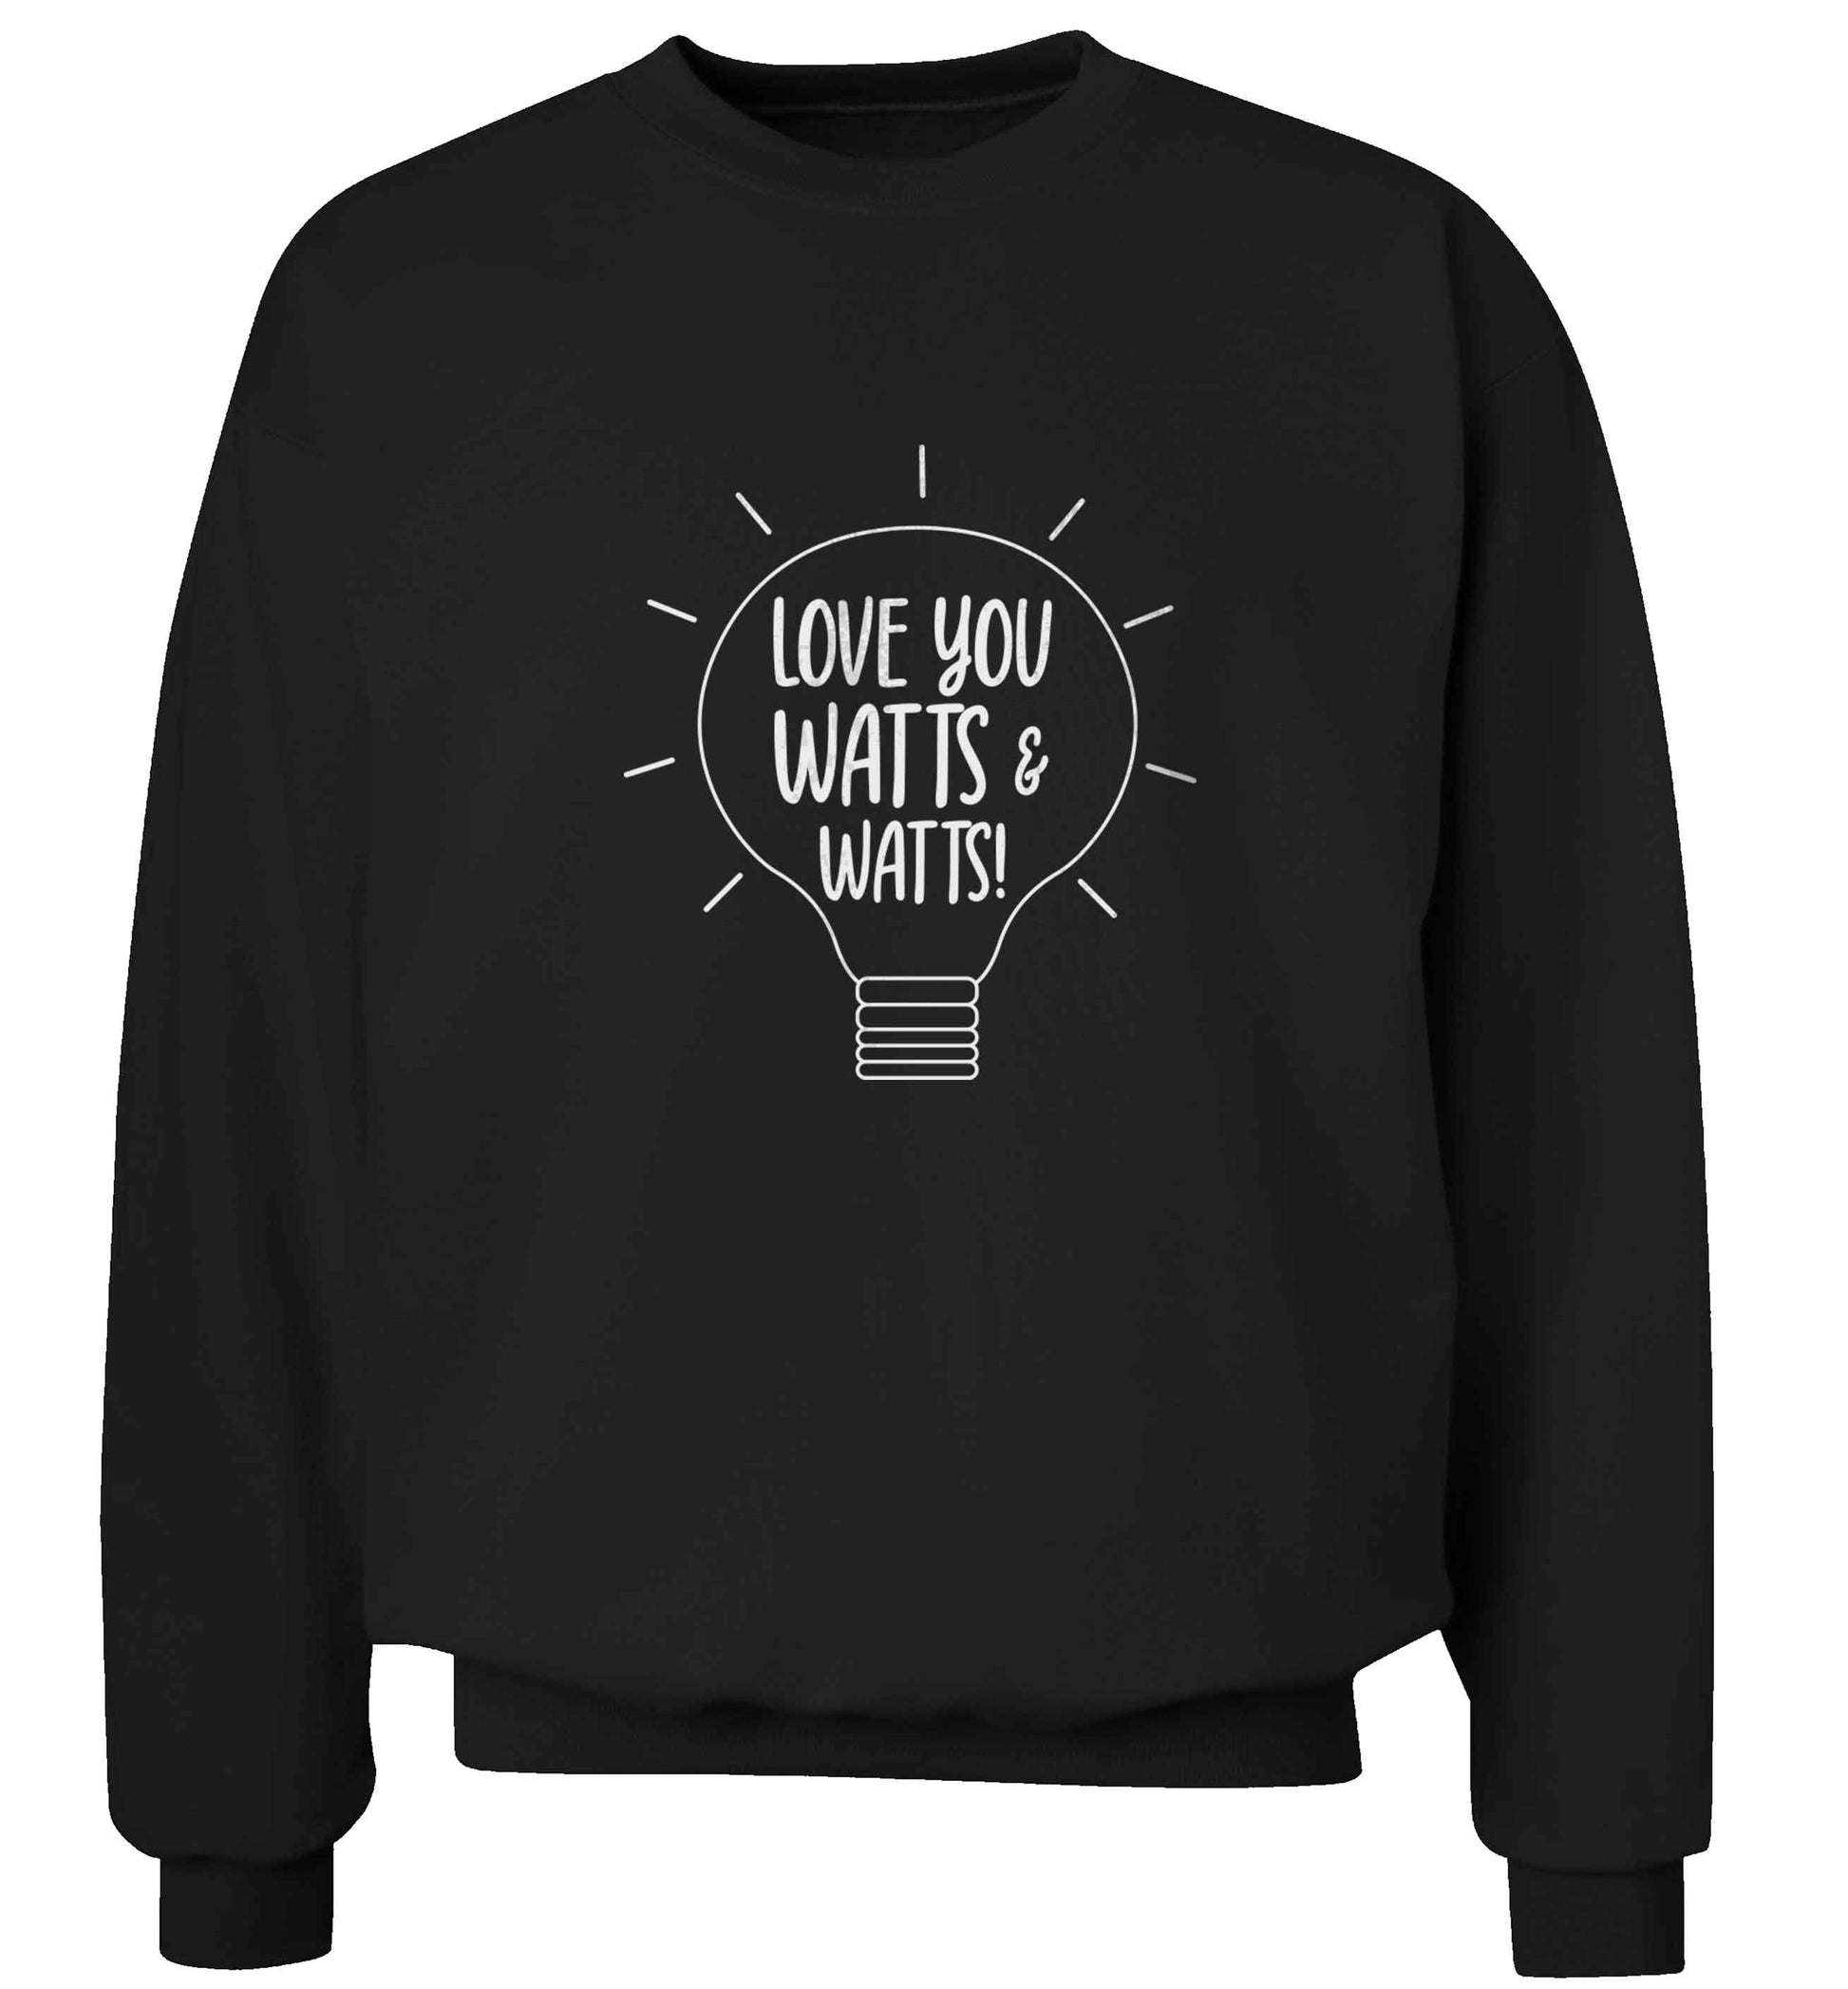 I love you watts and watts adult's unisex black sweater 2XL